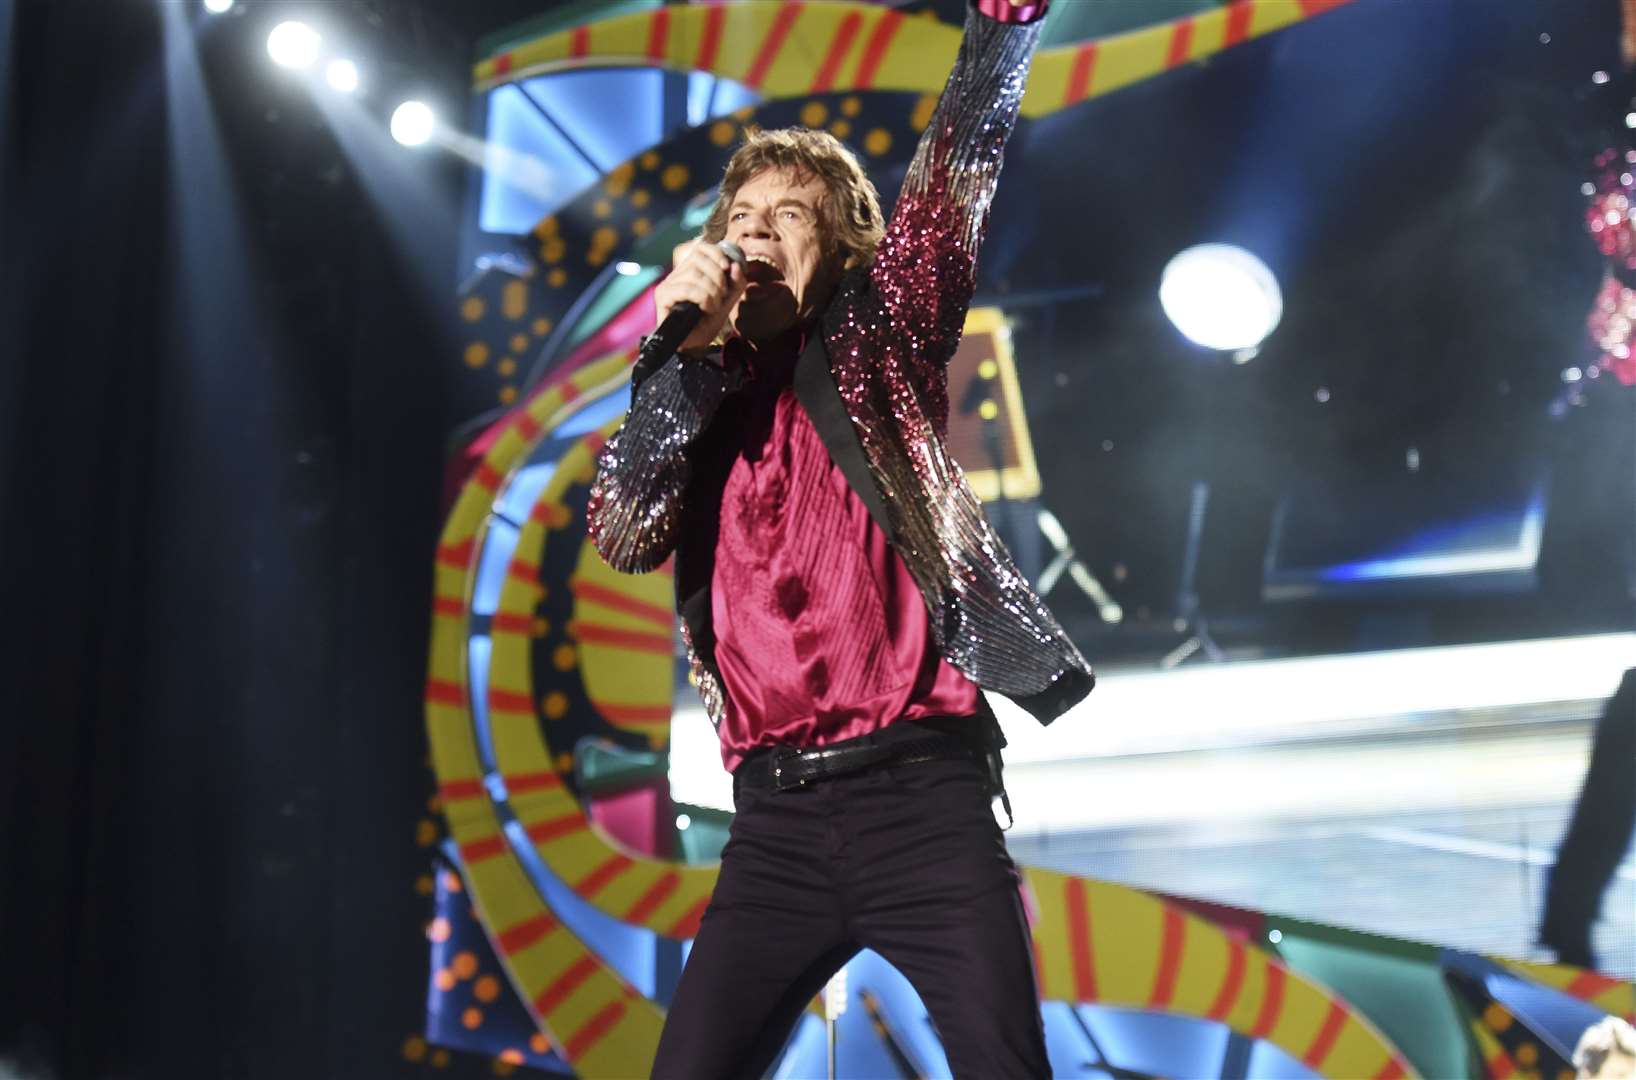 Mick Jagger is set to have heart surgery, Picture: Dave Hogan